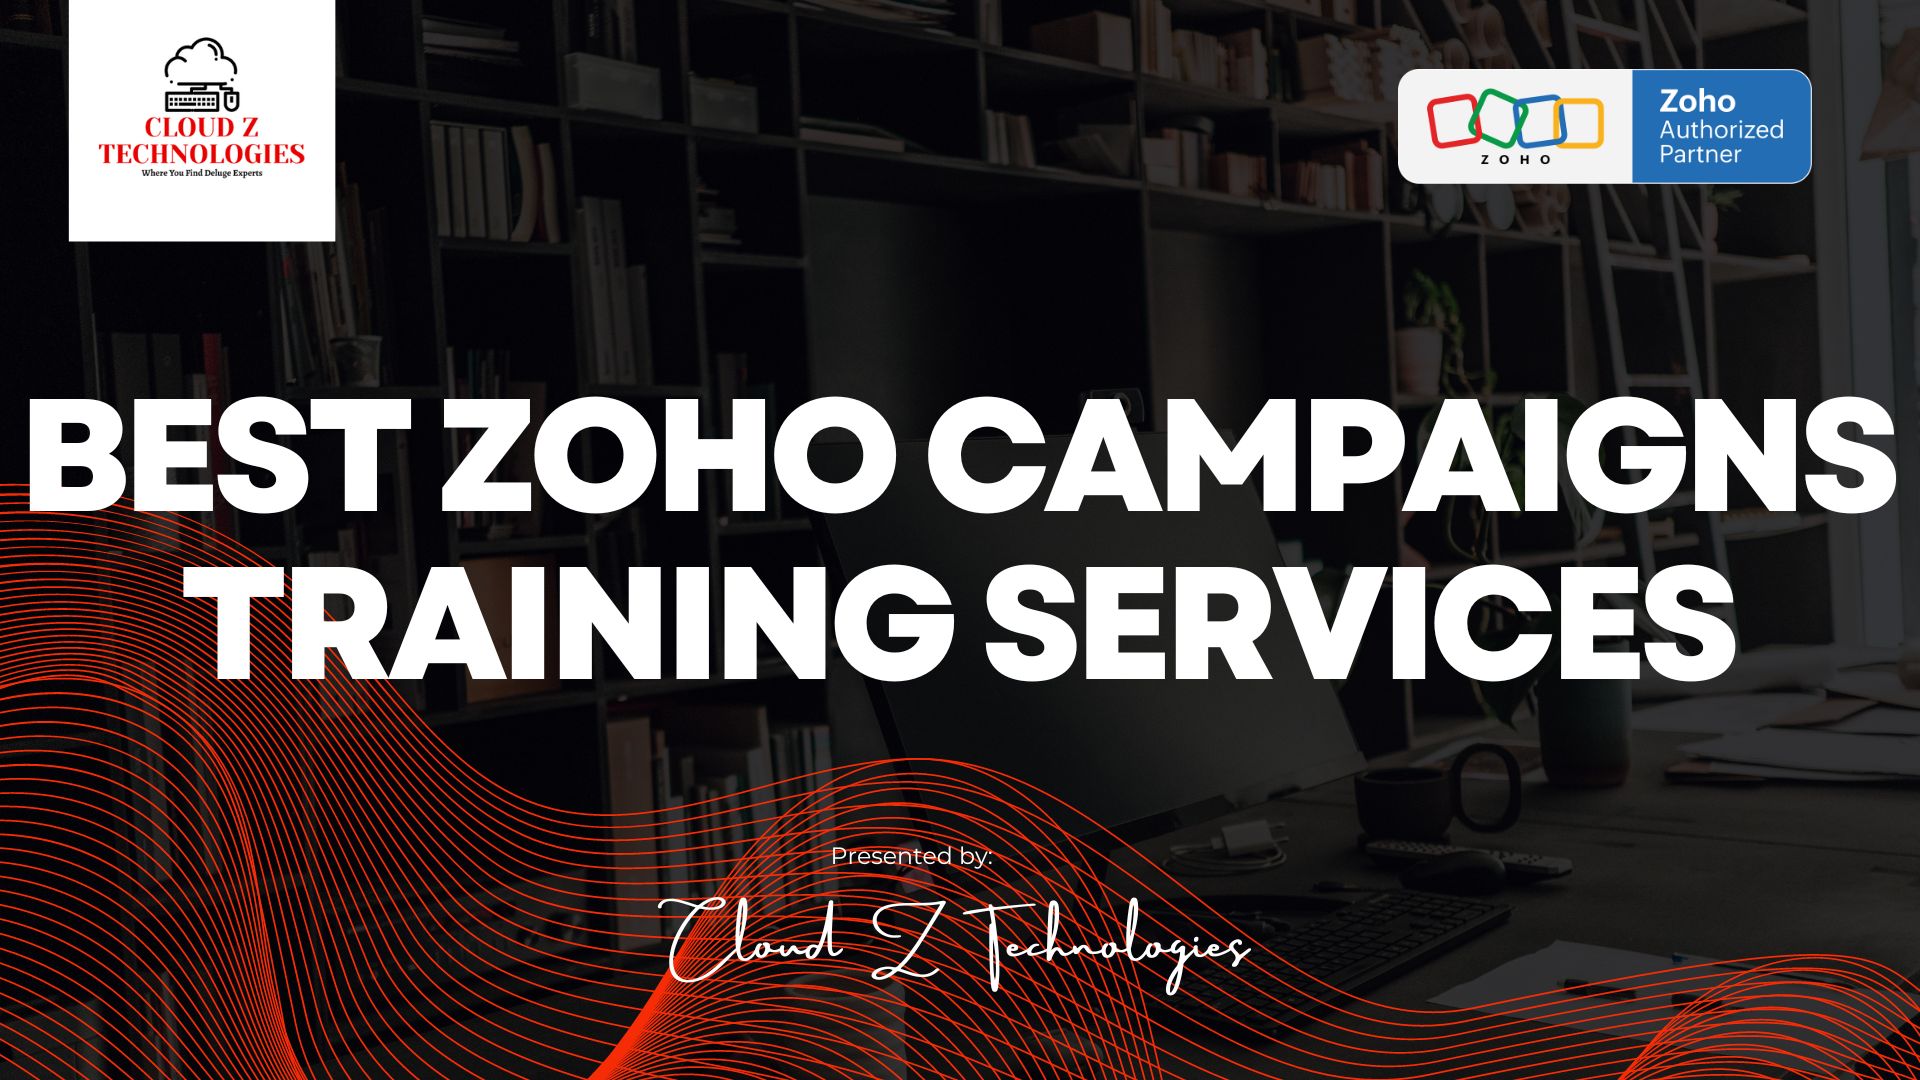 Zoho Campaigns training services